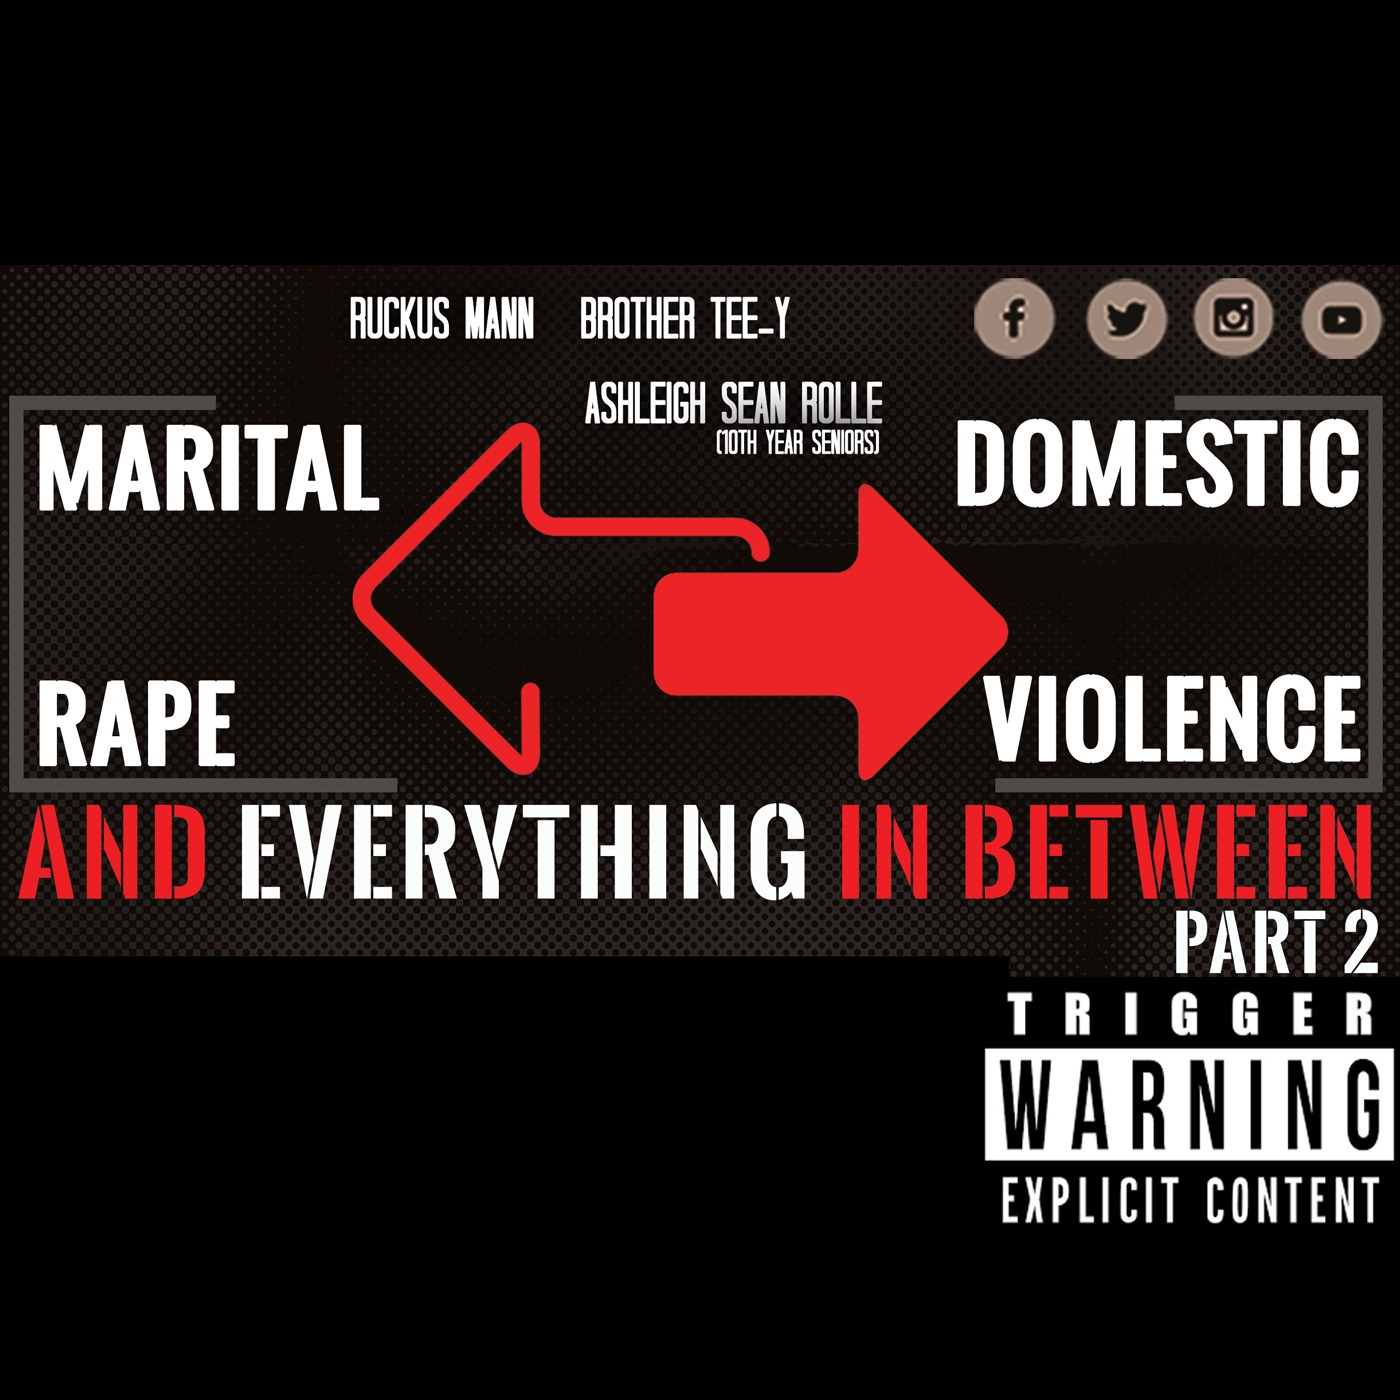 S4 EP8. Marital Rape, Domestic Violence and Everything In Between Part 2